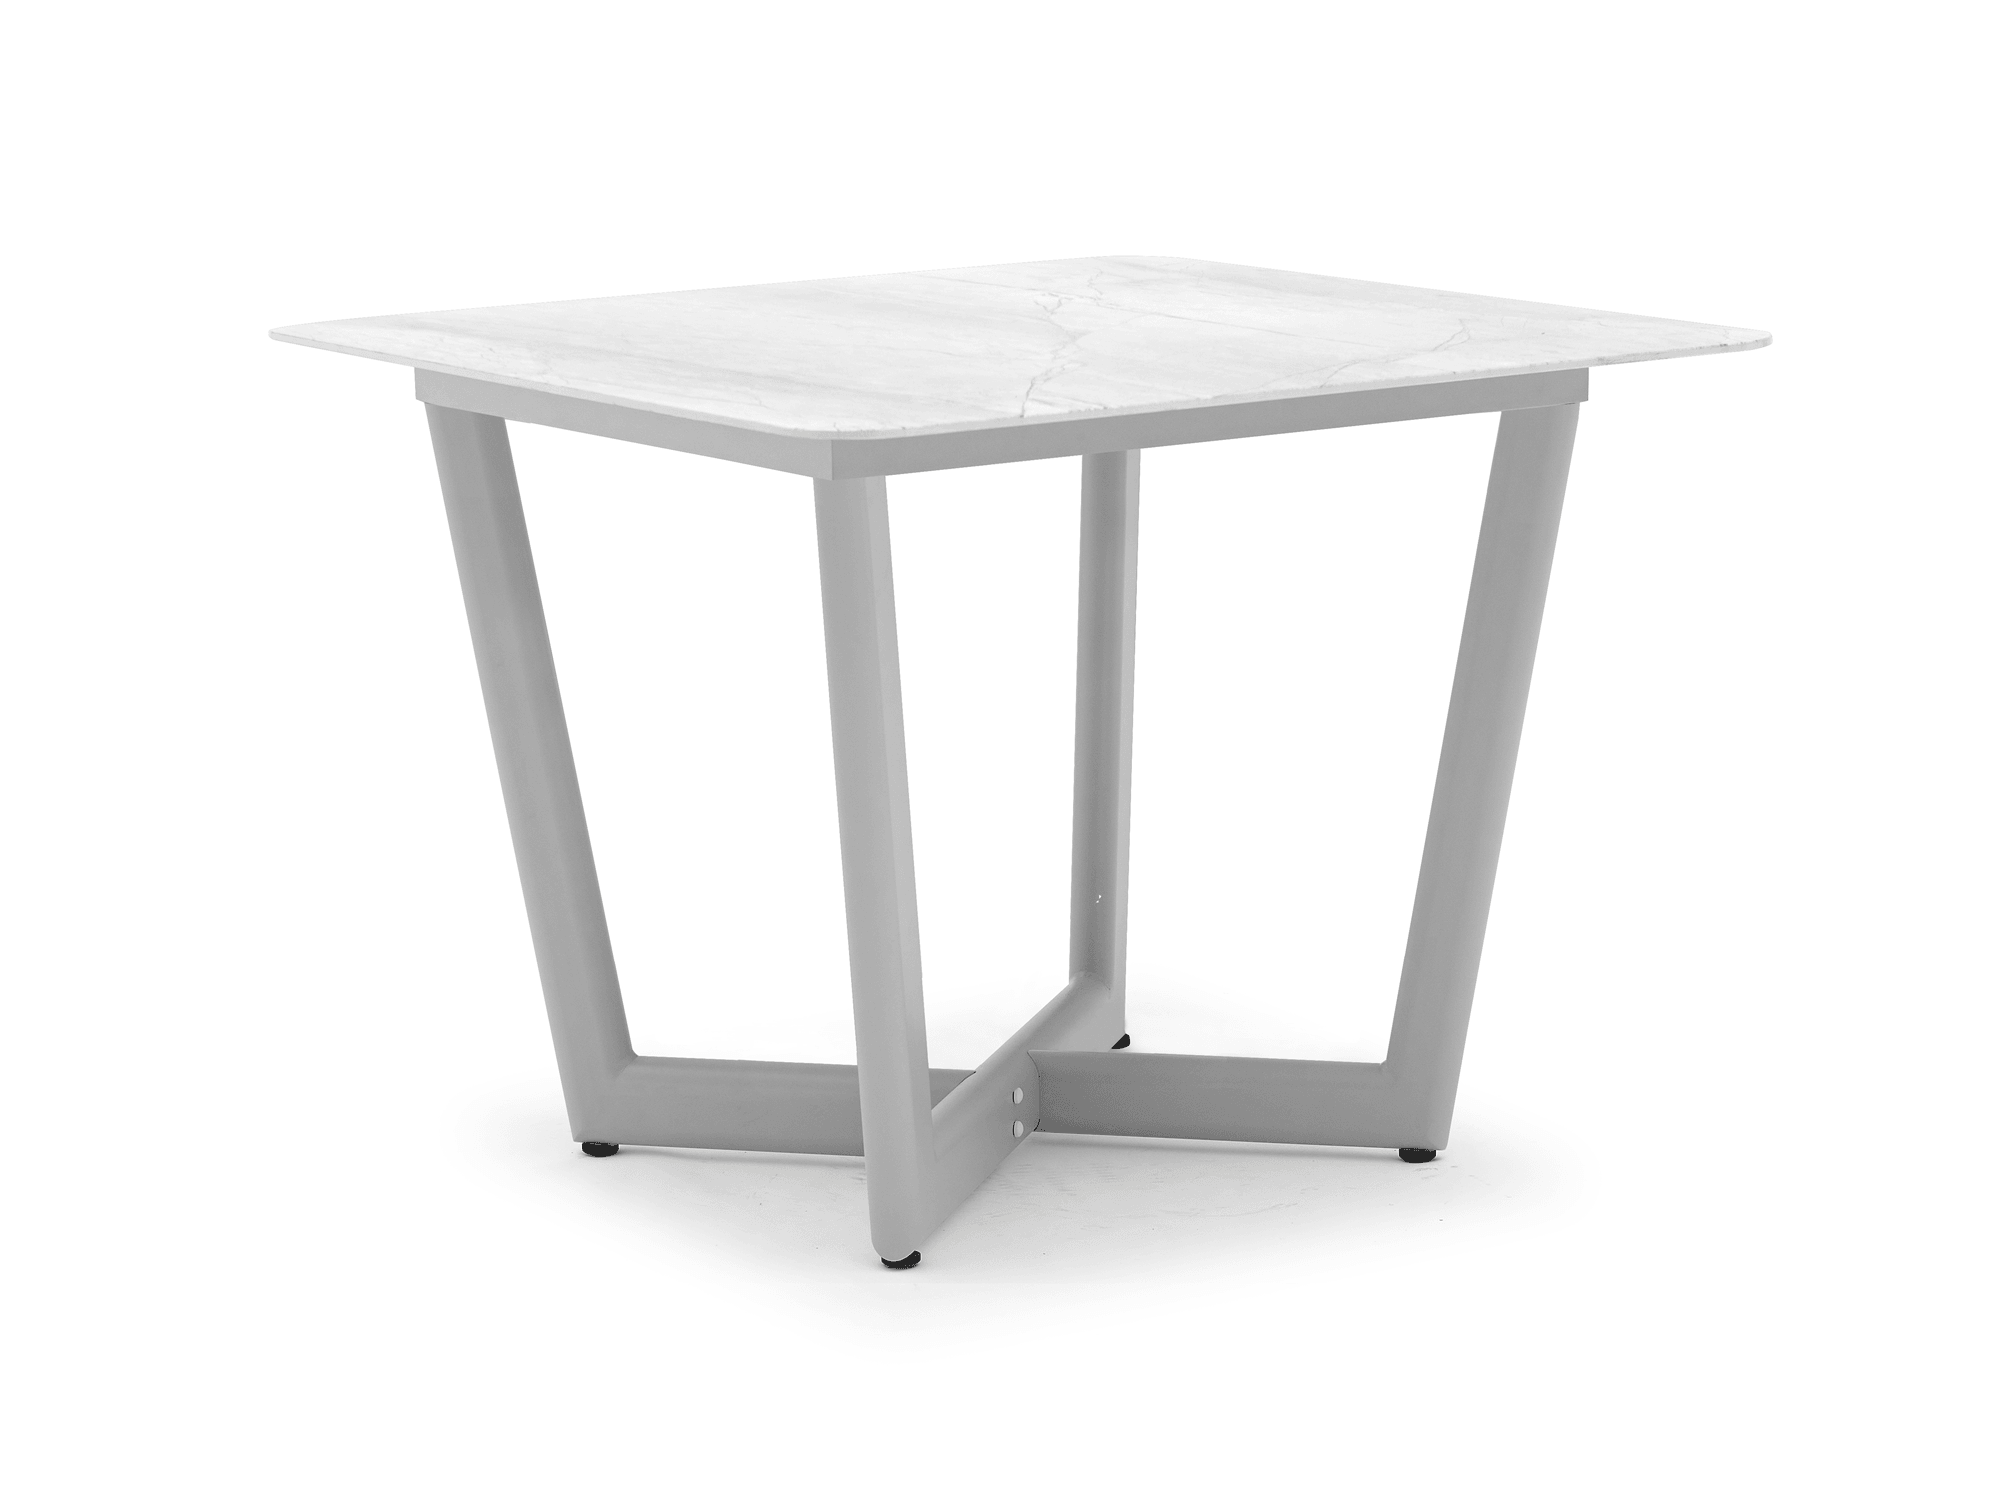 Amberly Dining Table in Light Grey - Euro Living Furniture